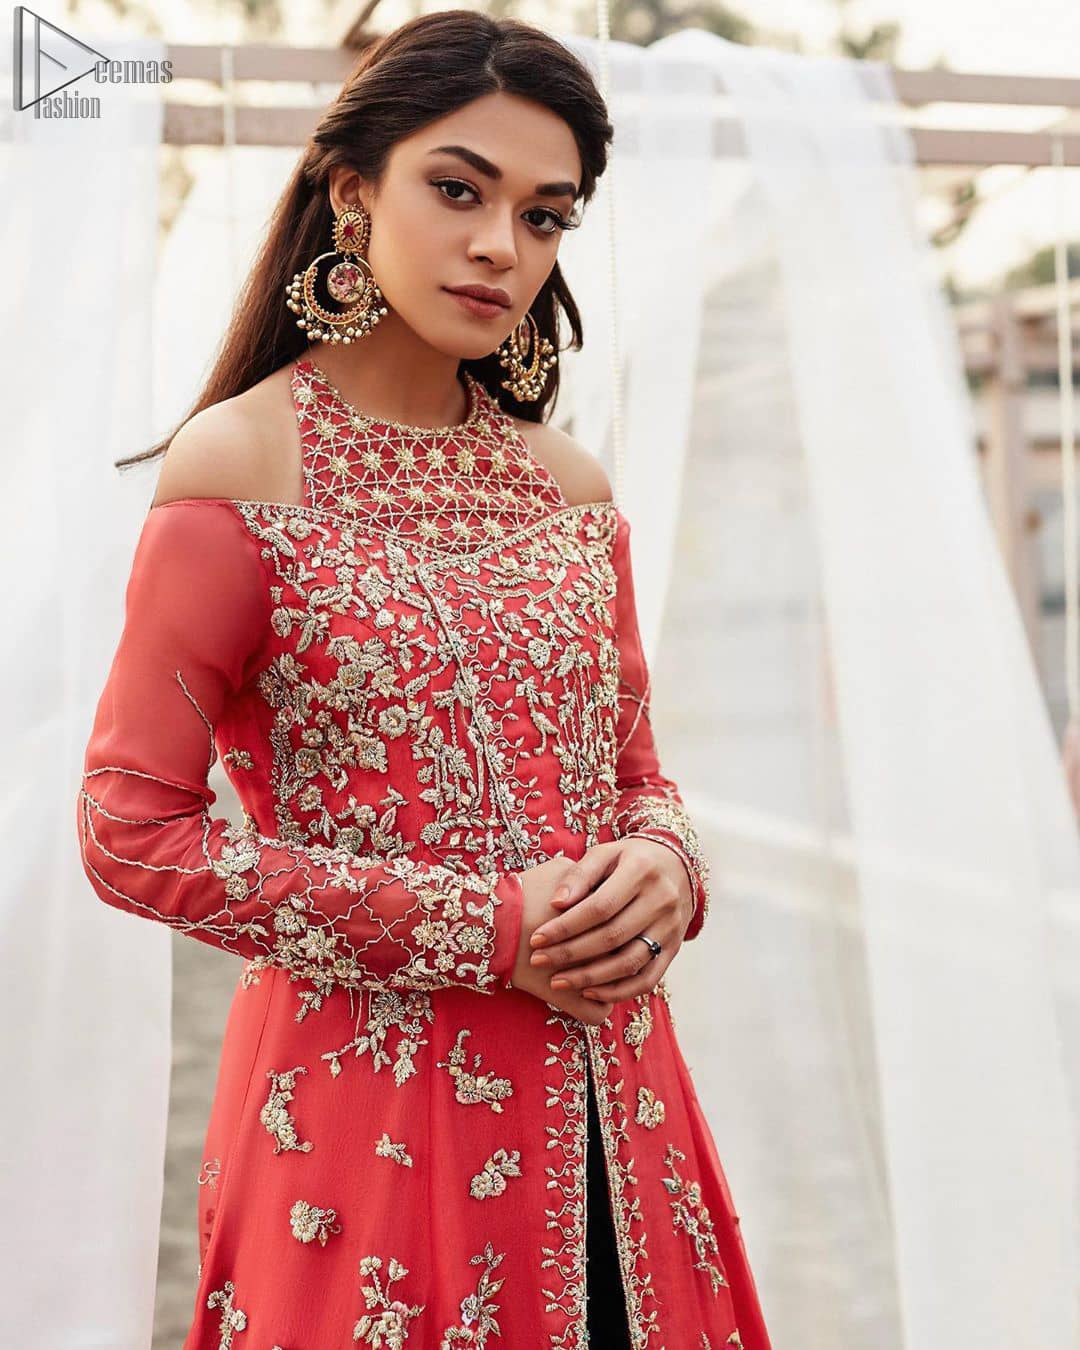 This outfit brings drama and playfulness to traditional frock and Sharara with a modern approach. Drape yourself to perfection for the classic affair in this flattering front open ensemble festooned with intricate zardozi hand embroidery work and motifs. The frock is furthermore adorned with halter neckline and comprises with overlaped bodice. Embellishment is done with zardozi embroidery in silver color. This outfit is comprises with bottle green velvet sharara and coral chiffon dupatta with sequins spray all over.